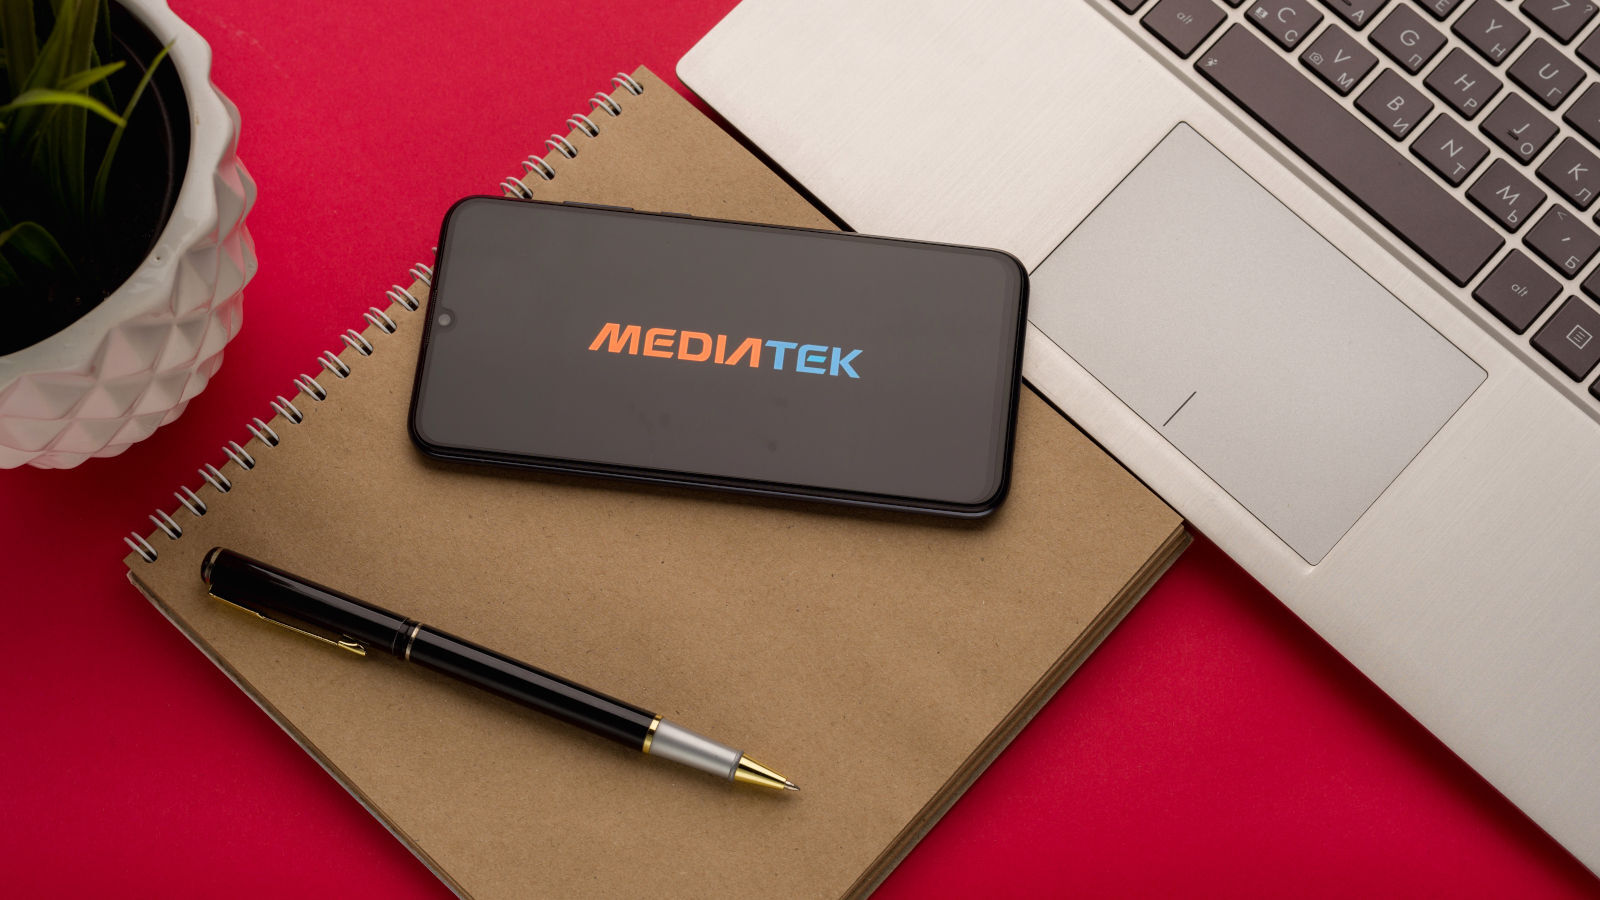 Back in February, MediaTek announced two gaming-oriented chips for under $200 mid-range devices. Now, the Taiwanese fabless semiconductor company retu